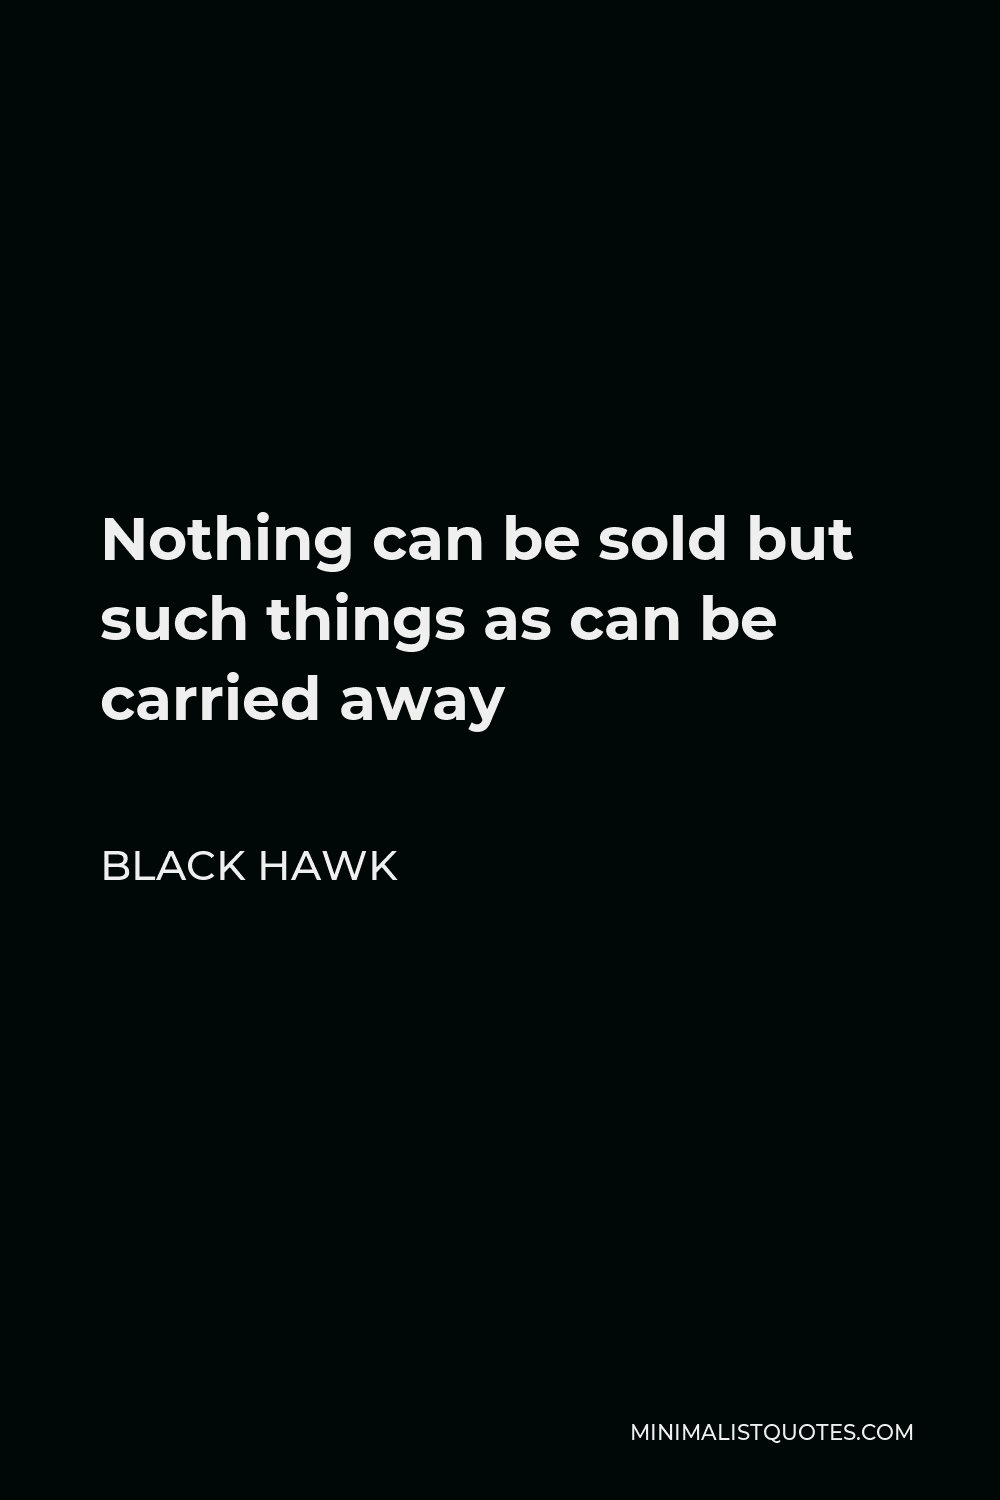 Black Hawk Quote - Nothing can be sold but such things as can be carried away